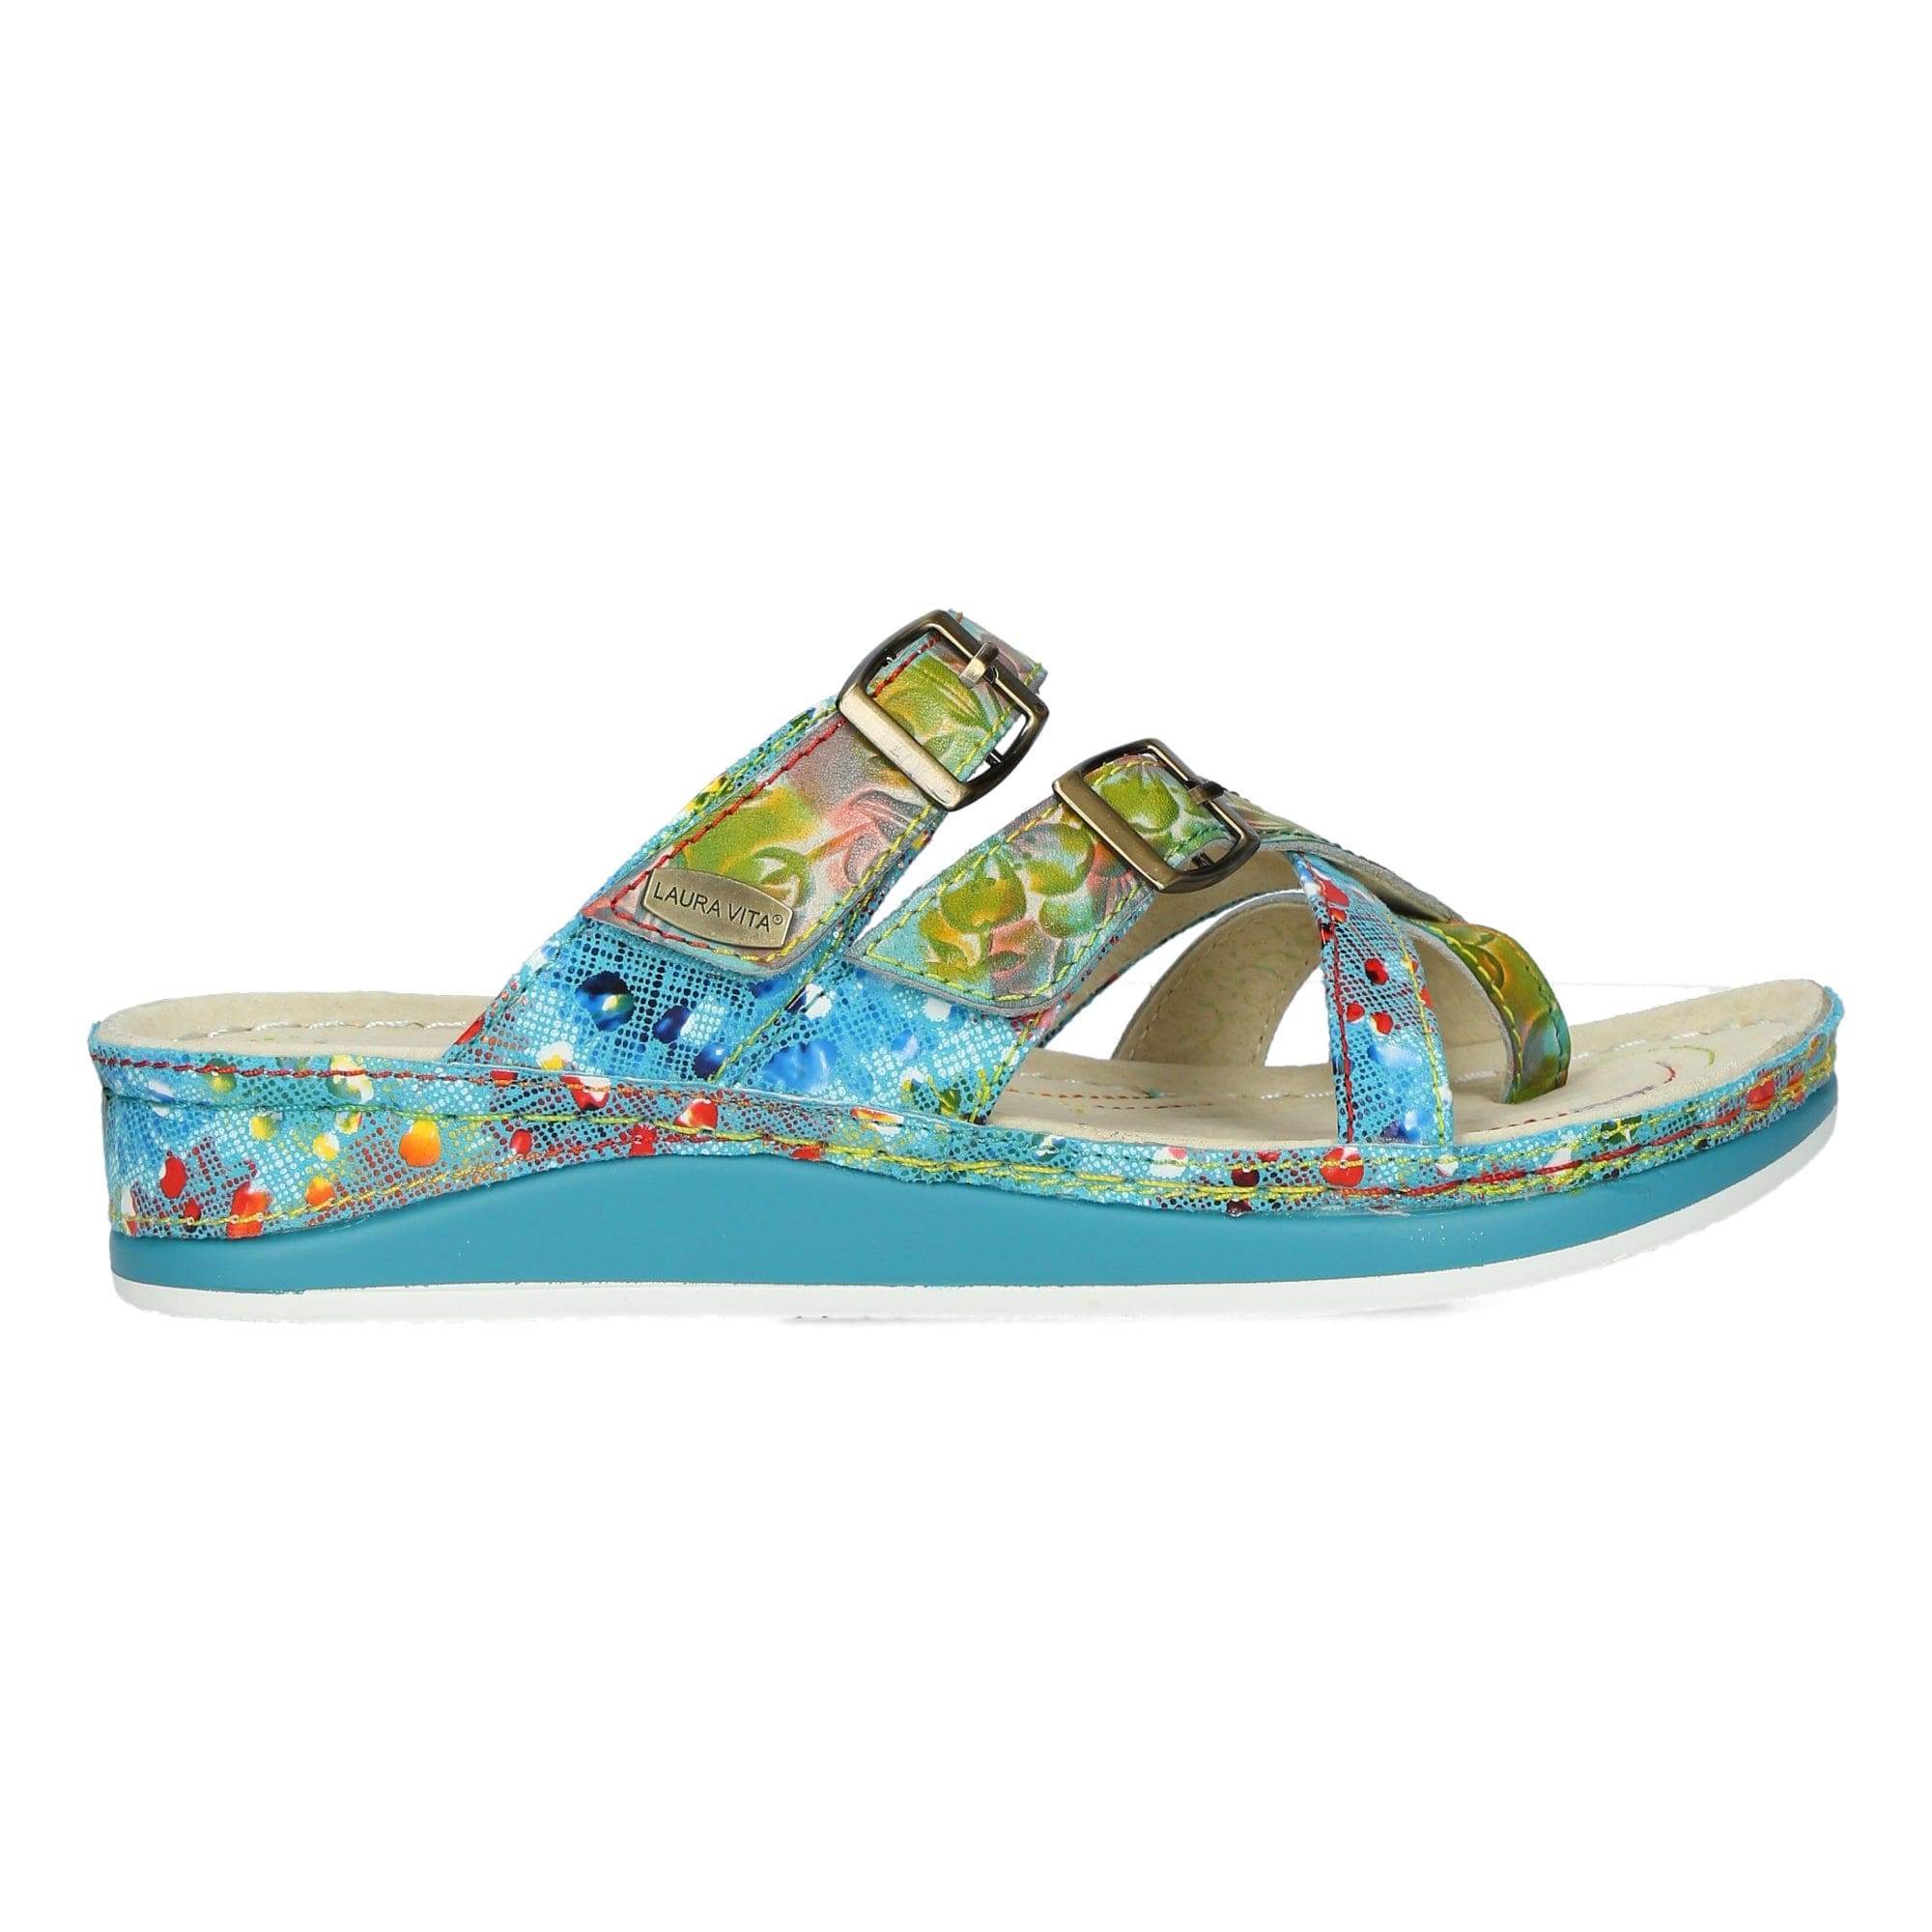 Chaussure BRCUELO 106 - 35 / Turquoise - Mule